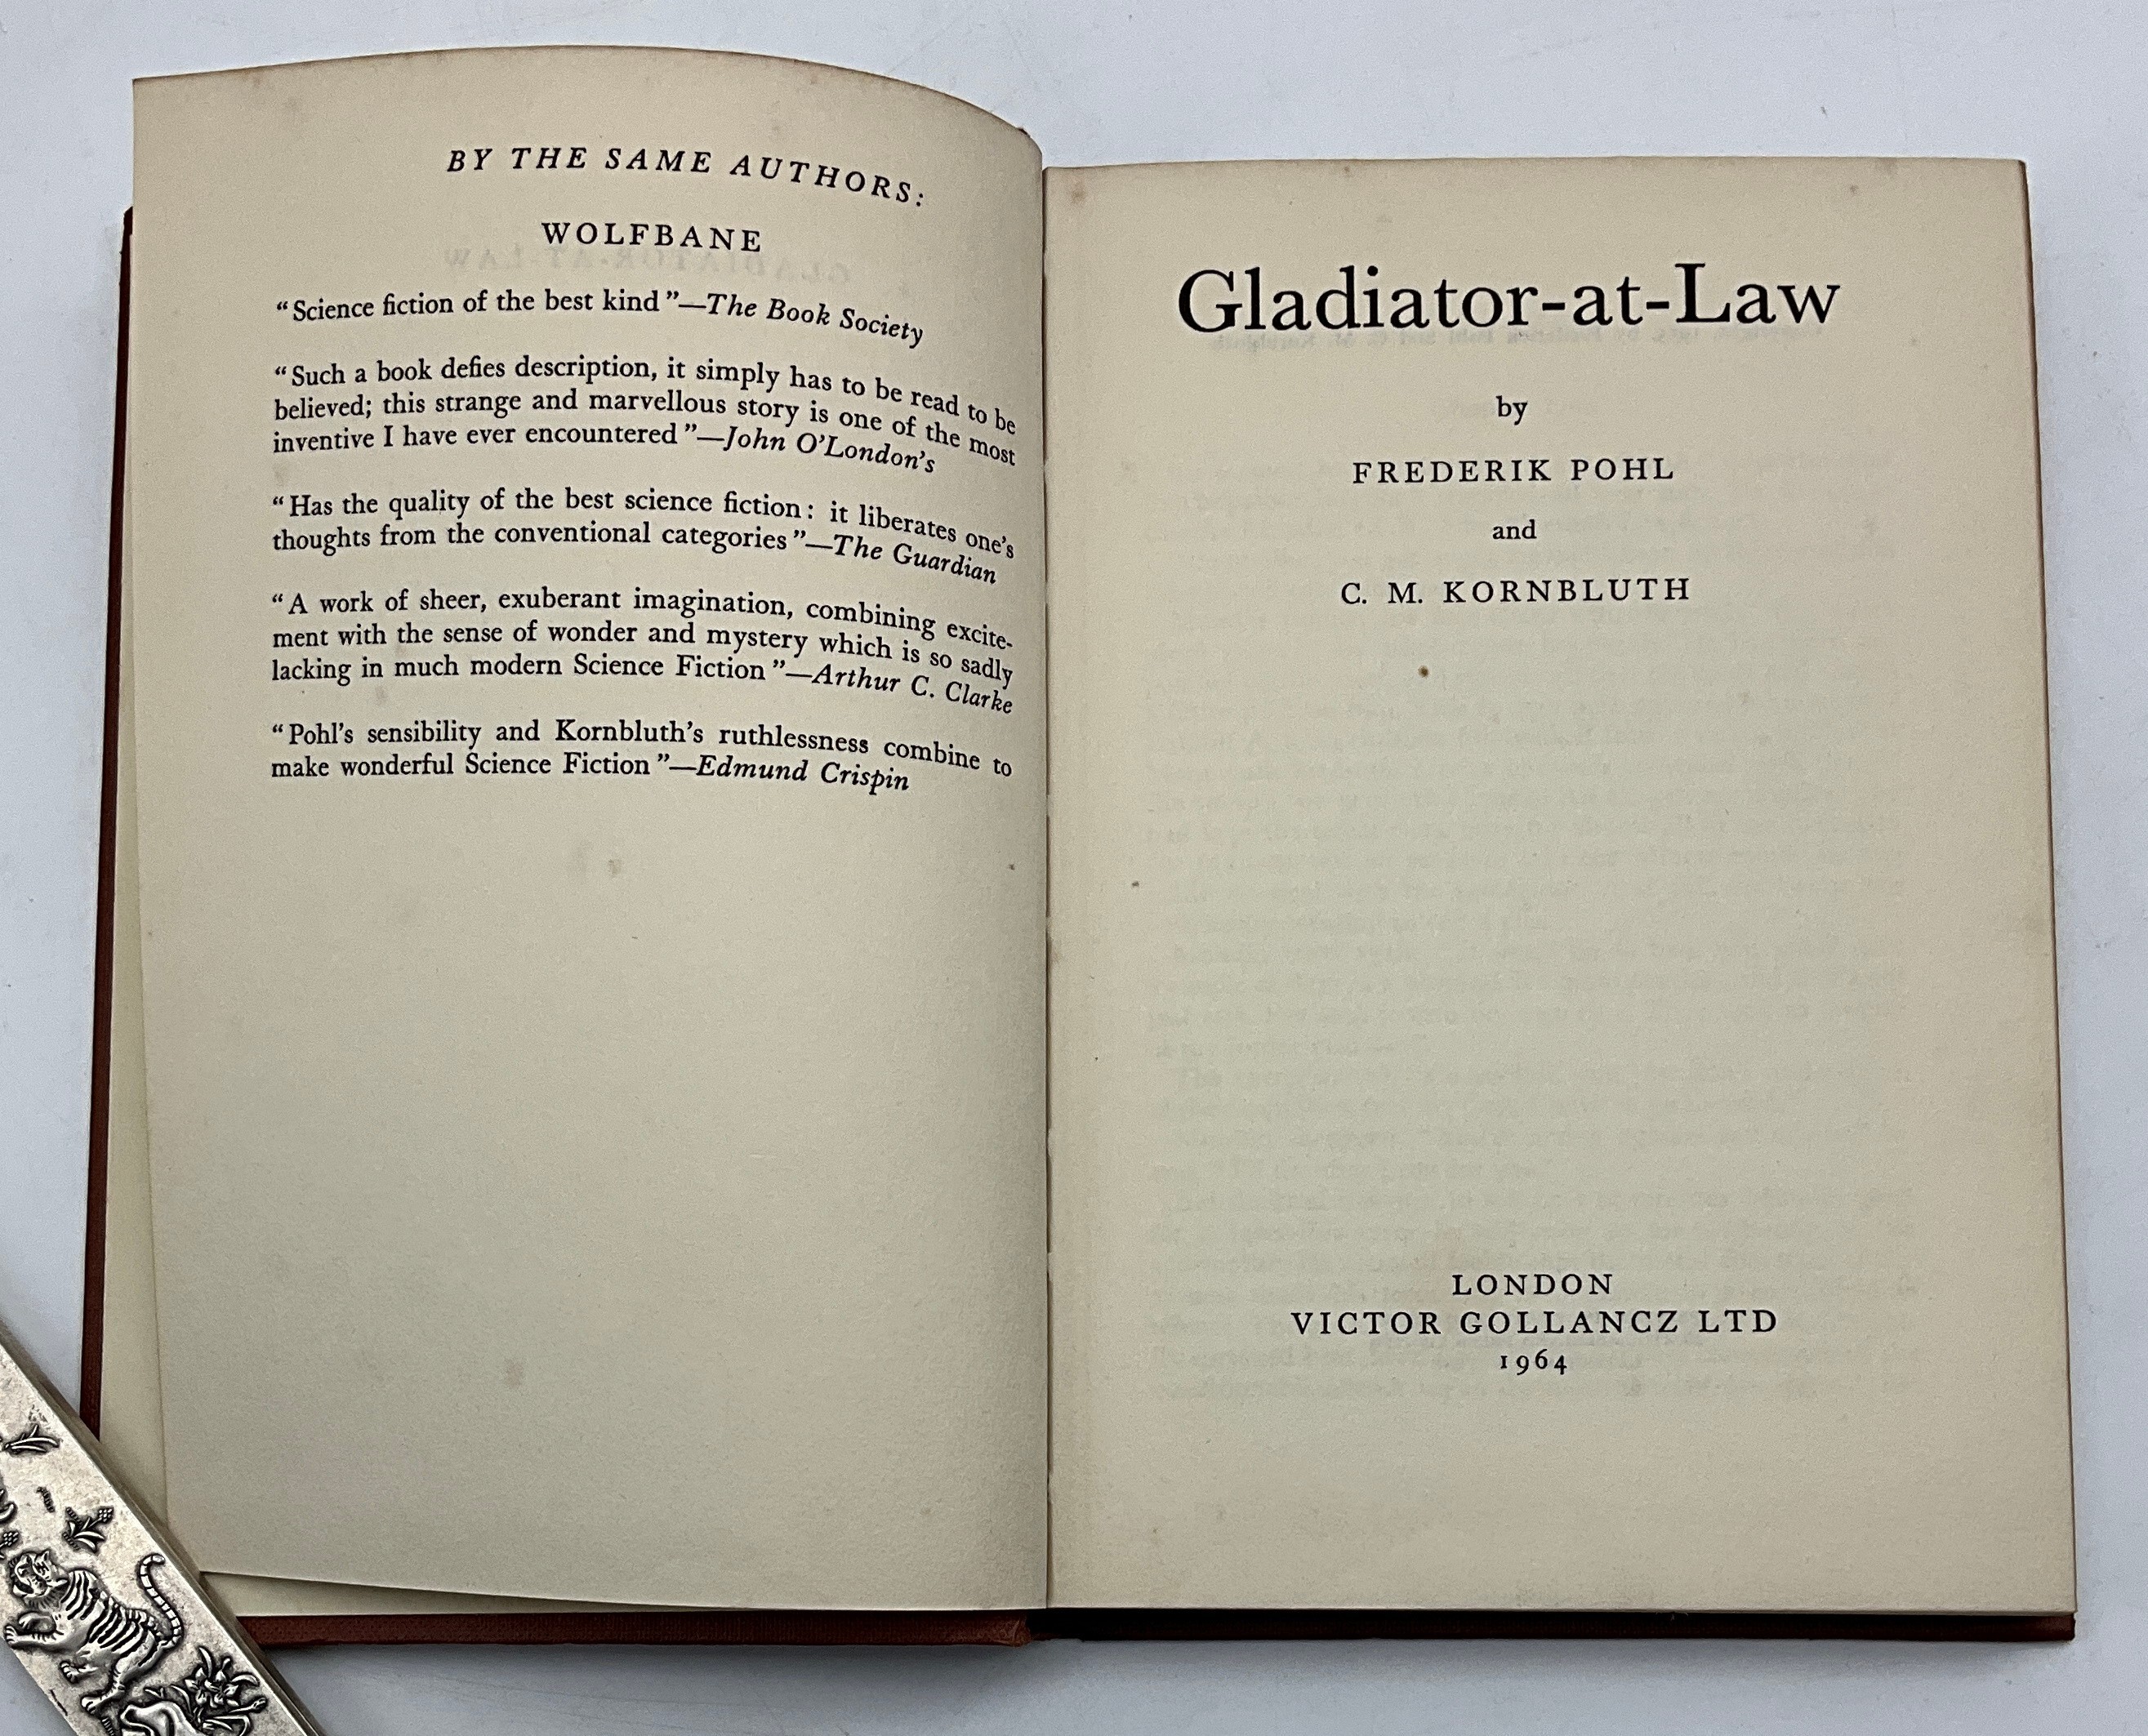 GLADIATOR-AT-LAW BY POHL & KORNBLUTH PUBLISHED BY GOLLANCZ 1964 - Image 2 of 2